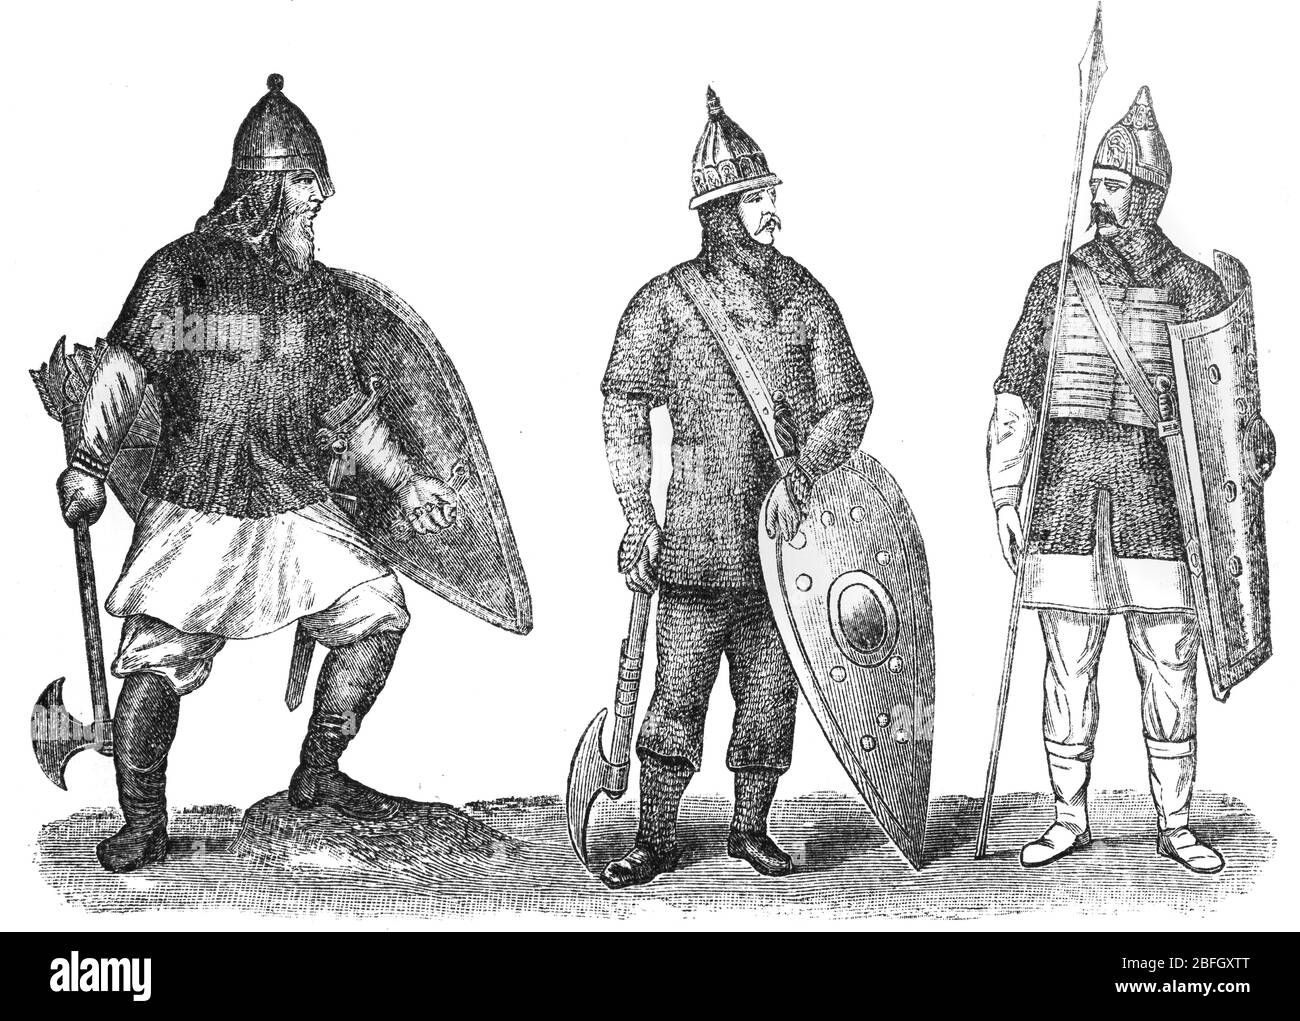 Russian warriors, 11th century, illustration from book dated 1916 Stock Photo